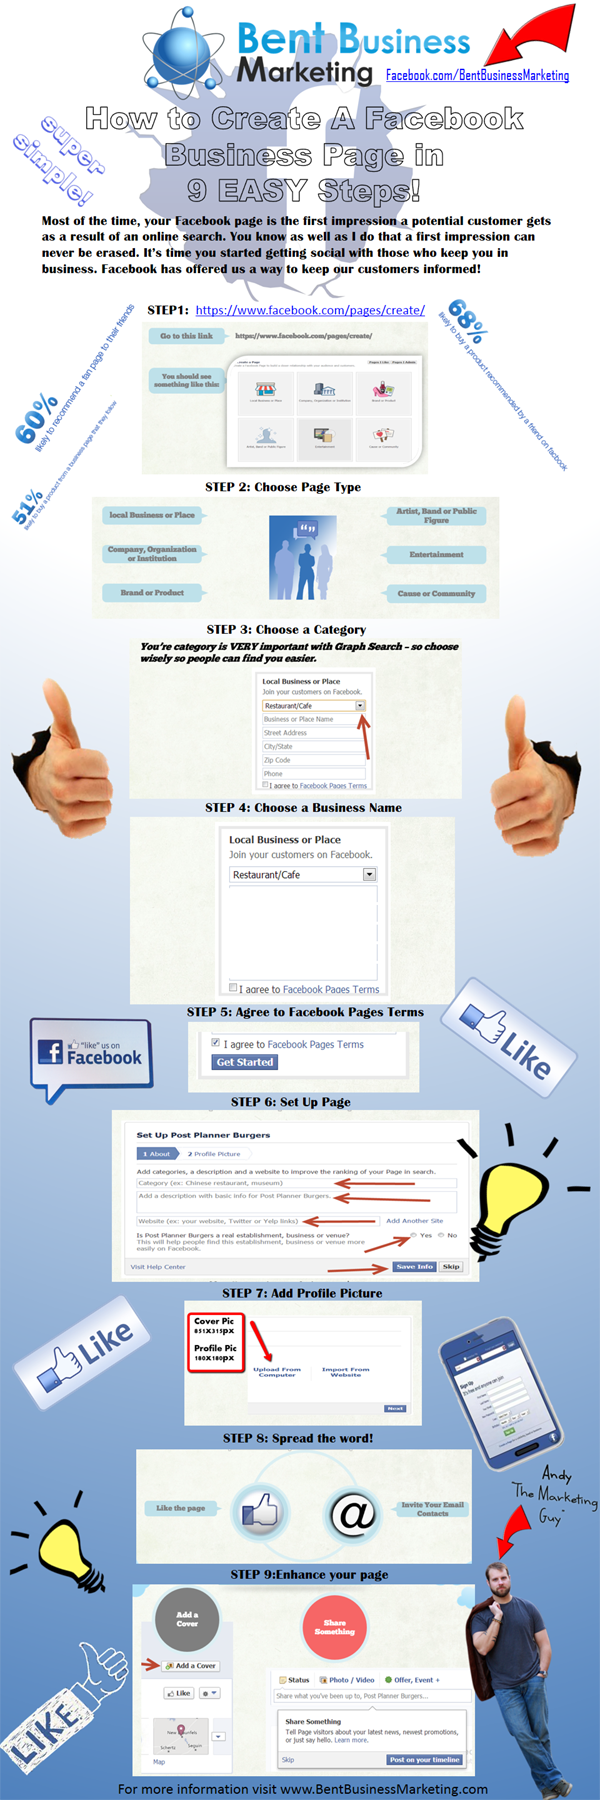 How to create a Facbook business page in 9 easy steps copy